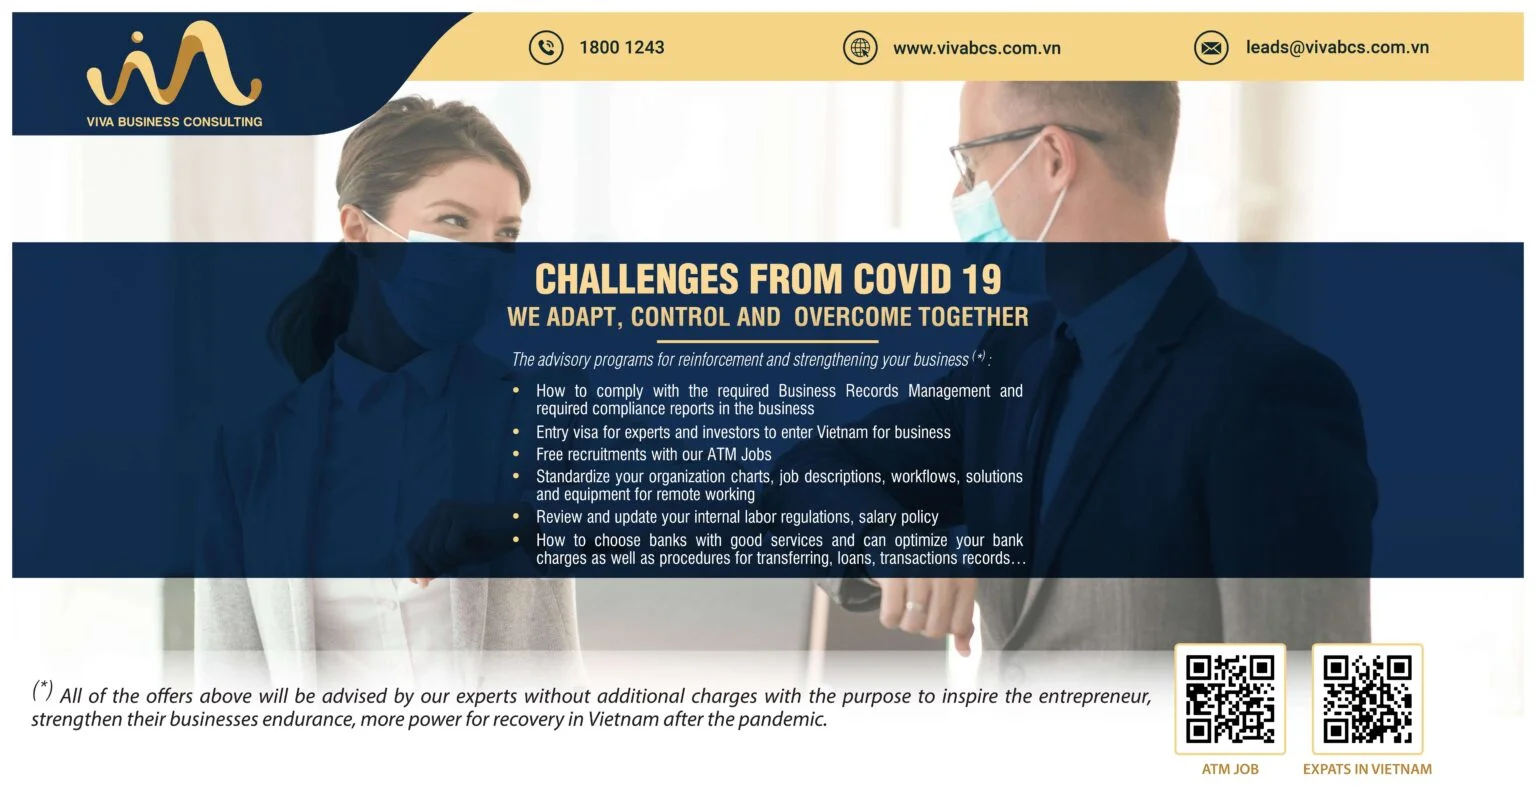 Challenges from COVID-19: Together we adapt, control & overcome